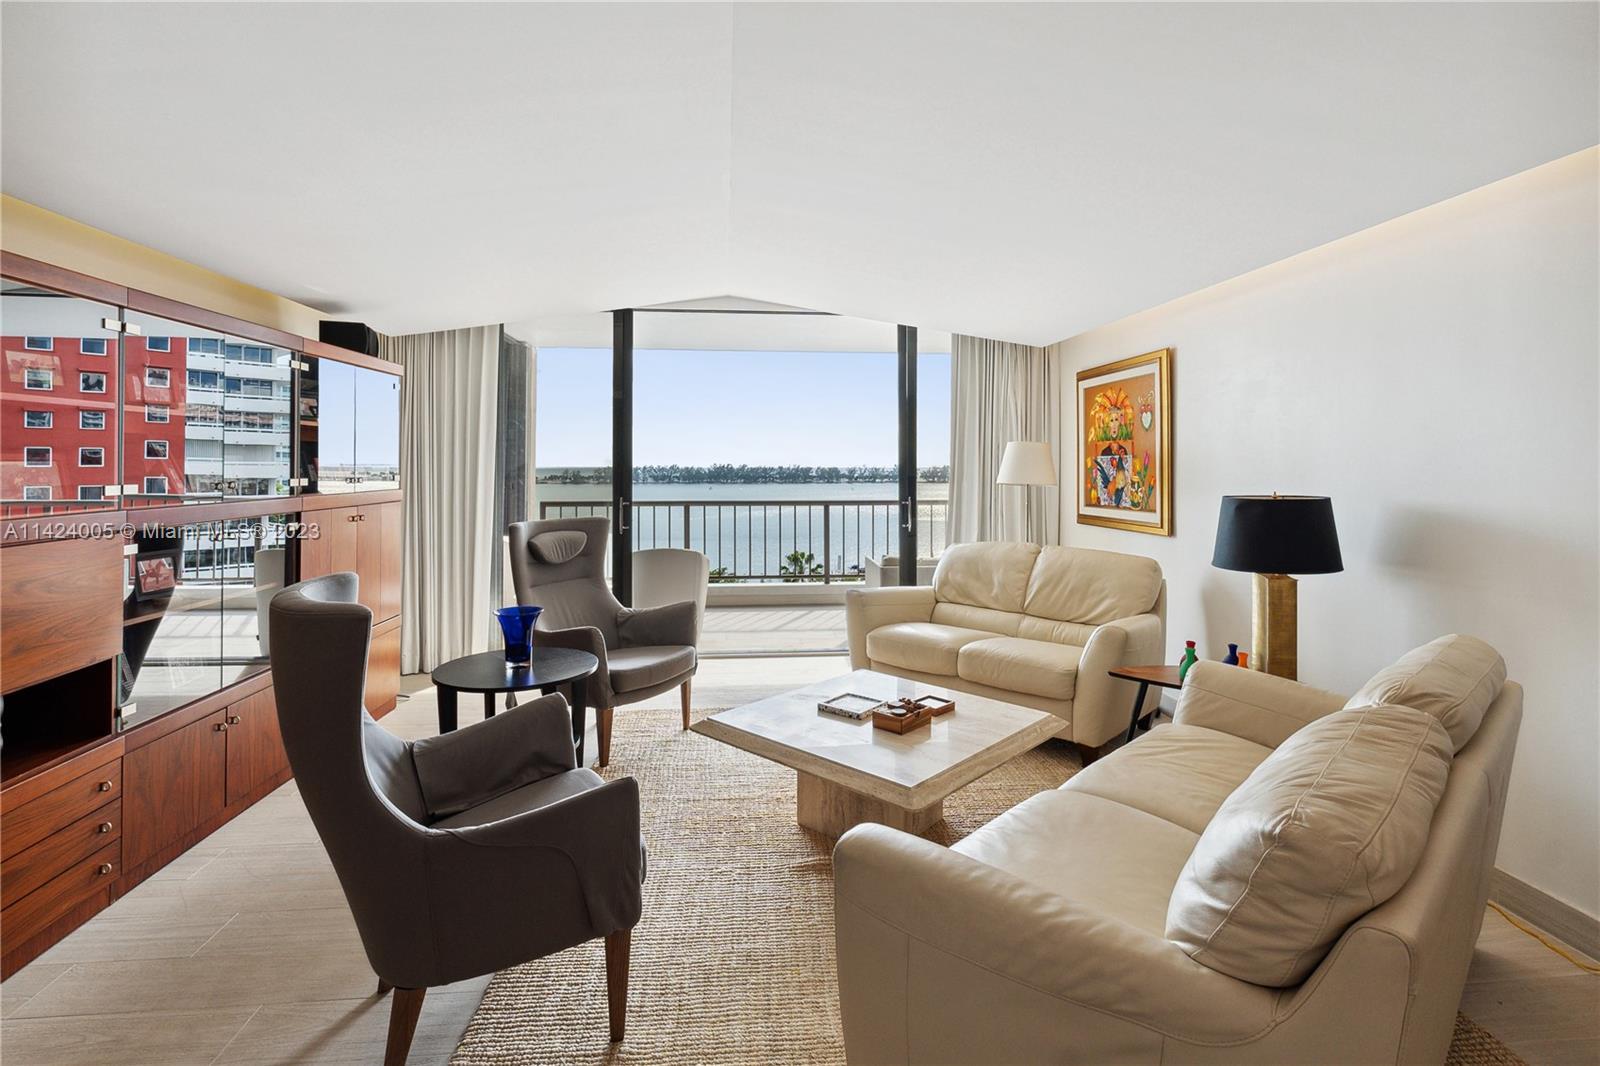 Step into this rarely available 02 line, 2 bed + den / 2 bath with direct bay views in the exquisite